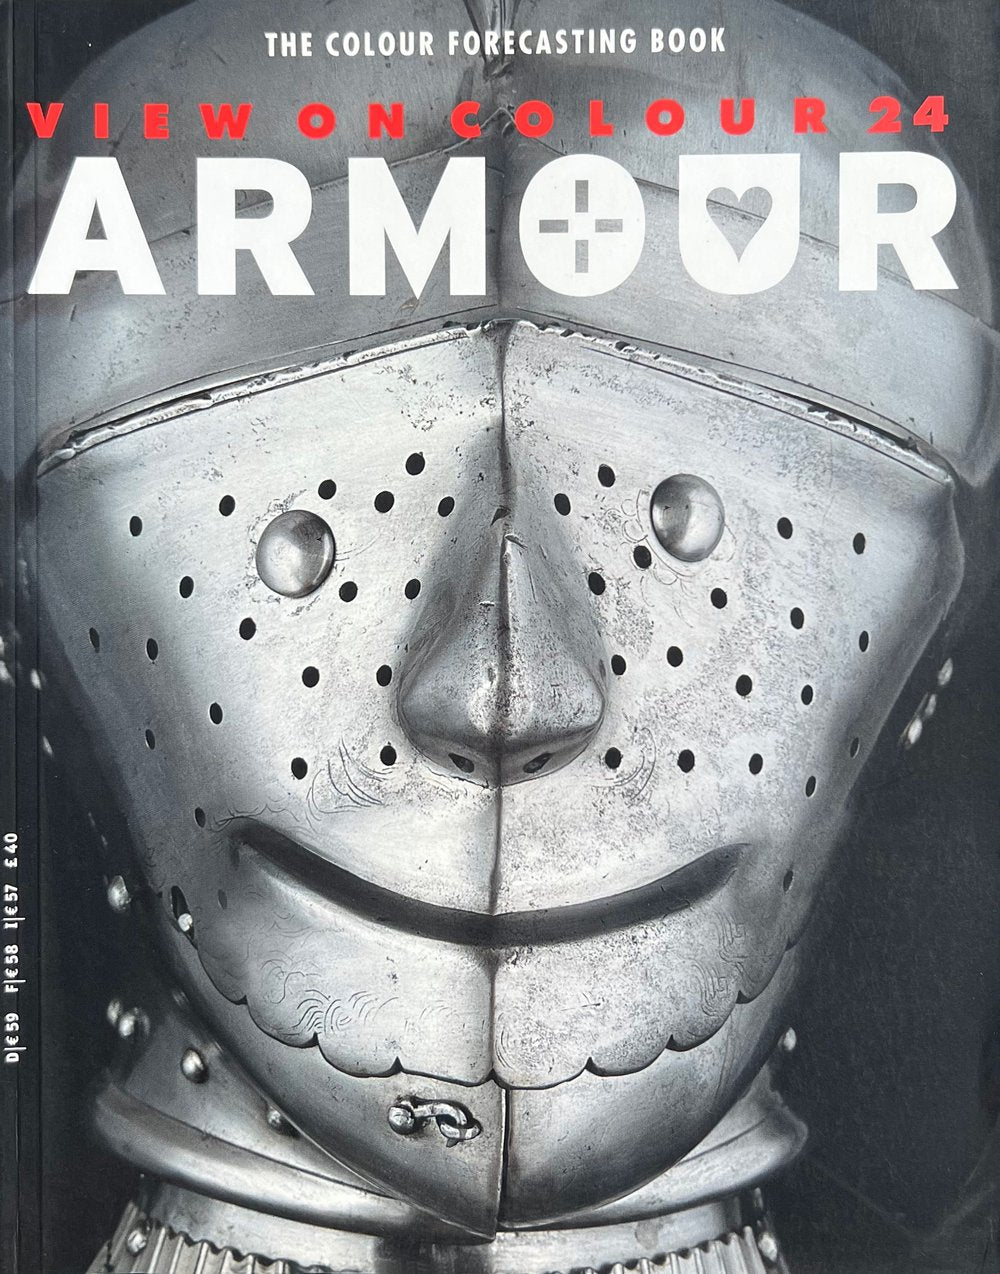 View on Colour 24 ARMOUR